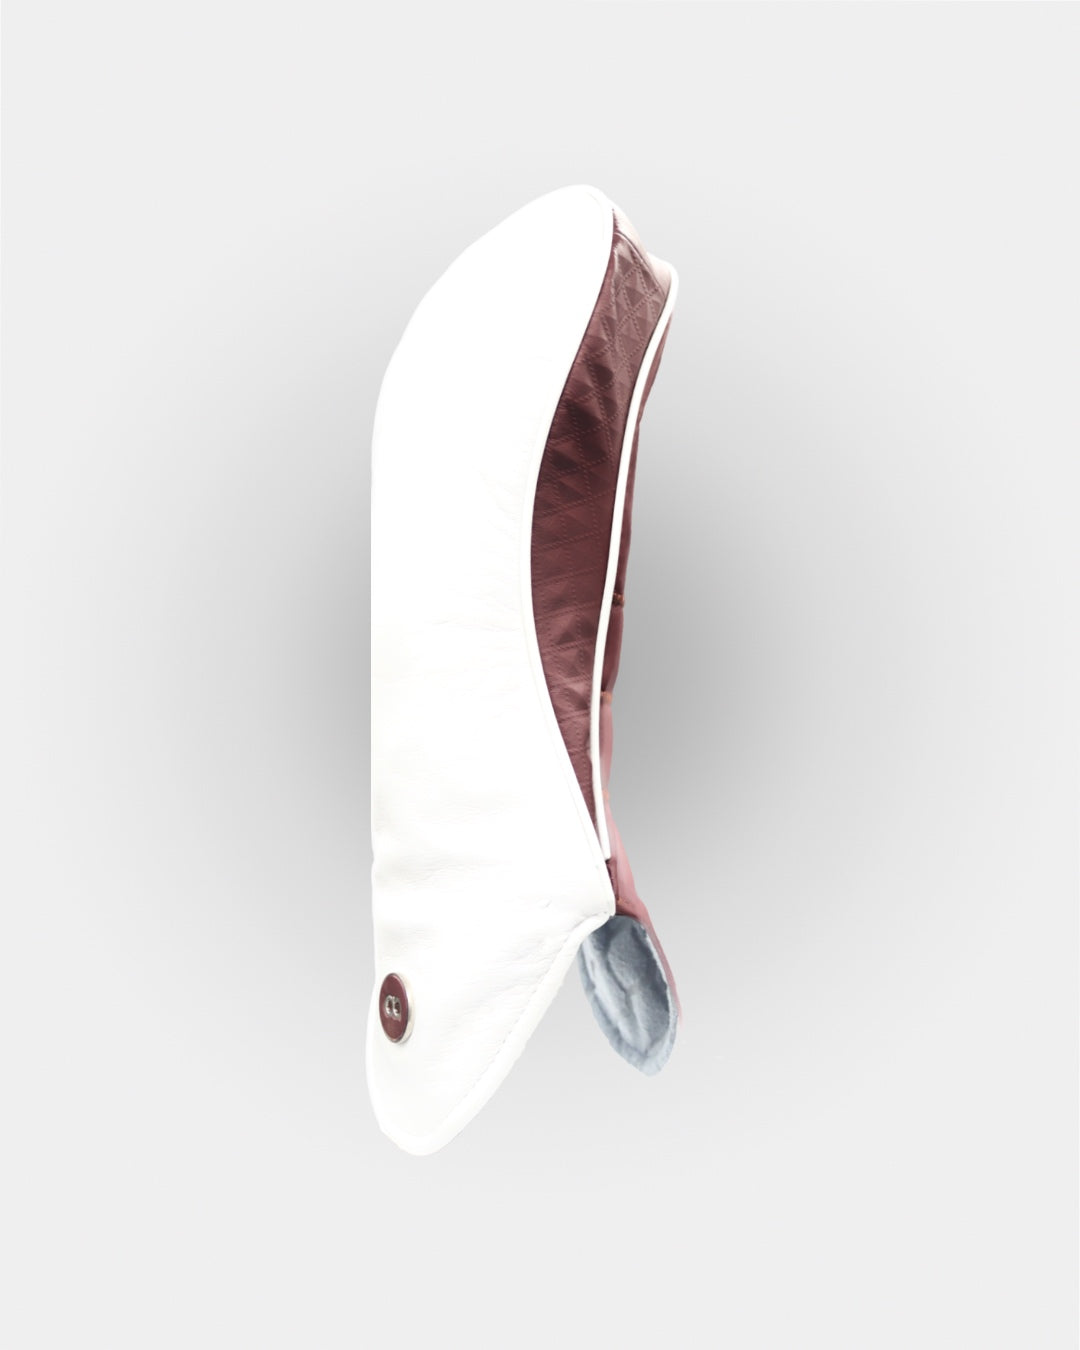 White and burgundy leather fairway wood headcover by David Alexander